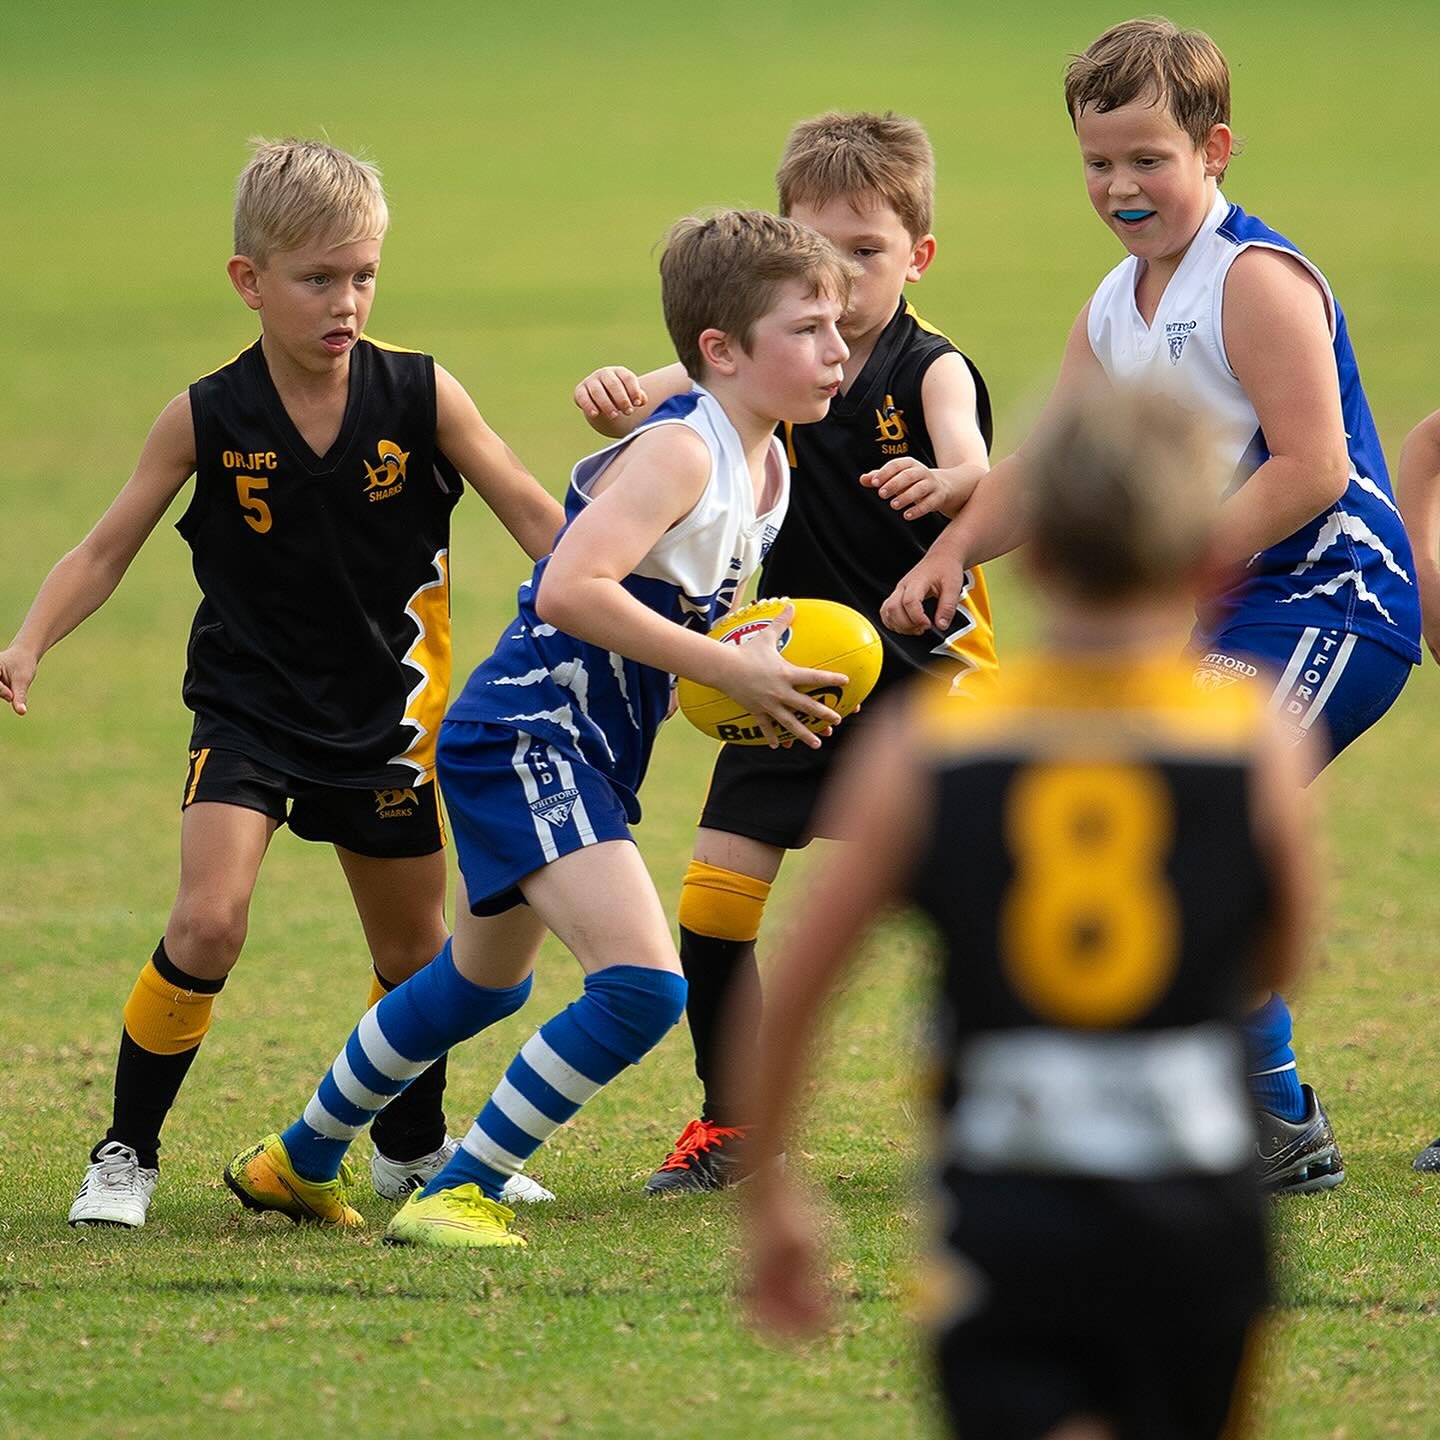 We hope your week is as successful as Andy from our Y3 Lynx escaping the congestion and clearing the ball forward towards goal!

Photo: @maxted 

#wjfc_wildcats #wafooty #wajuniorfooty #6025community